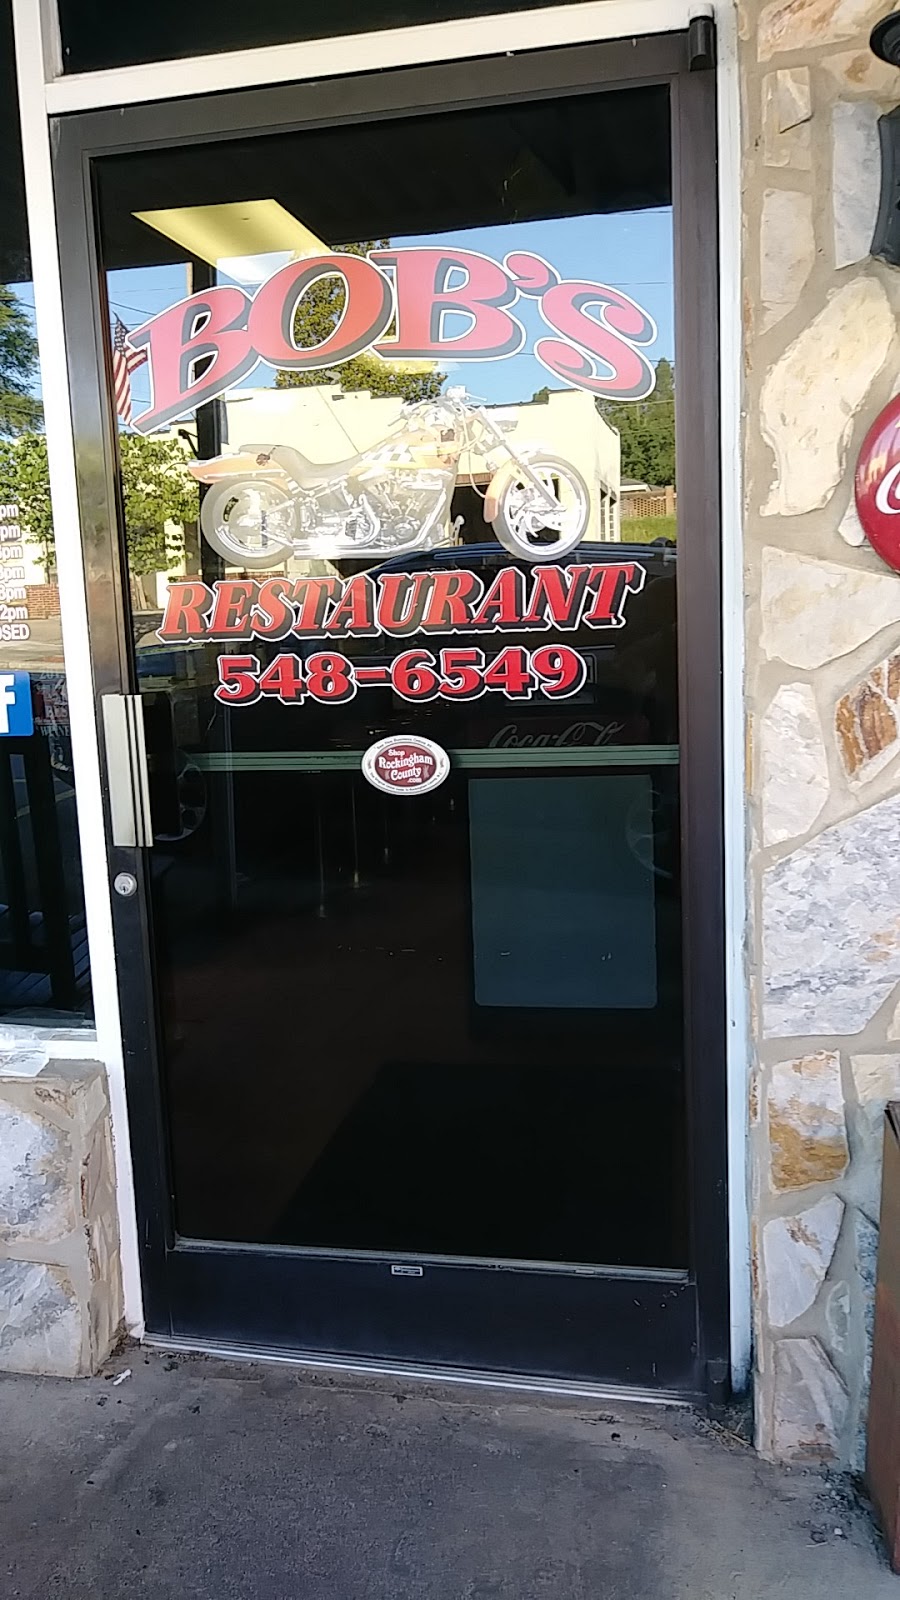 Bobs Restaurant & Catering | 124 S Market St, Madison, NC 27025, USA | Phone: (336) 548-6549